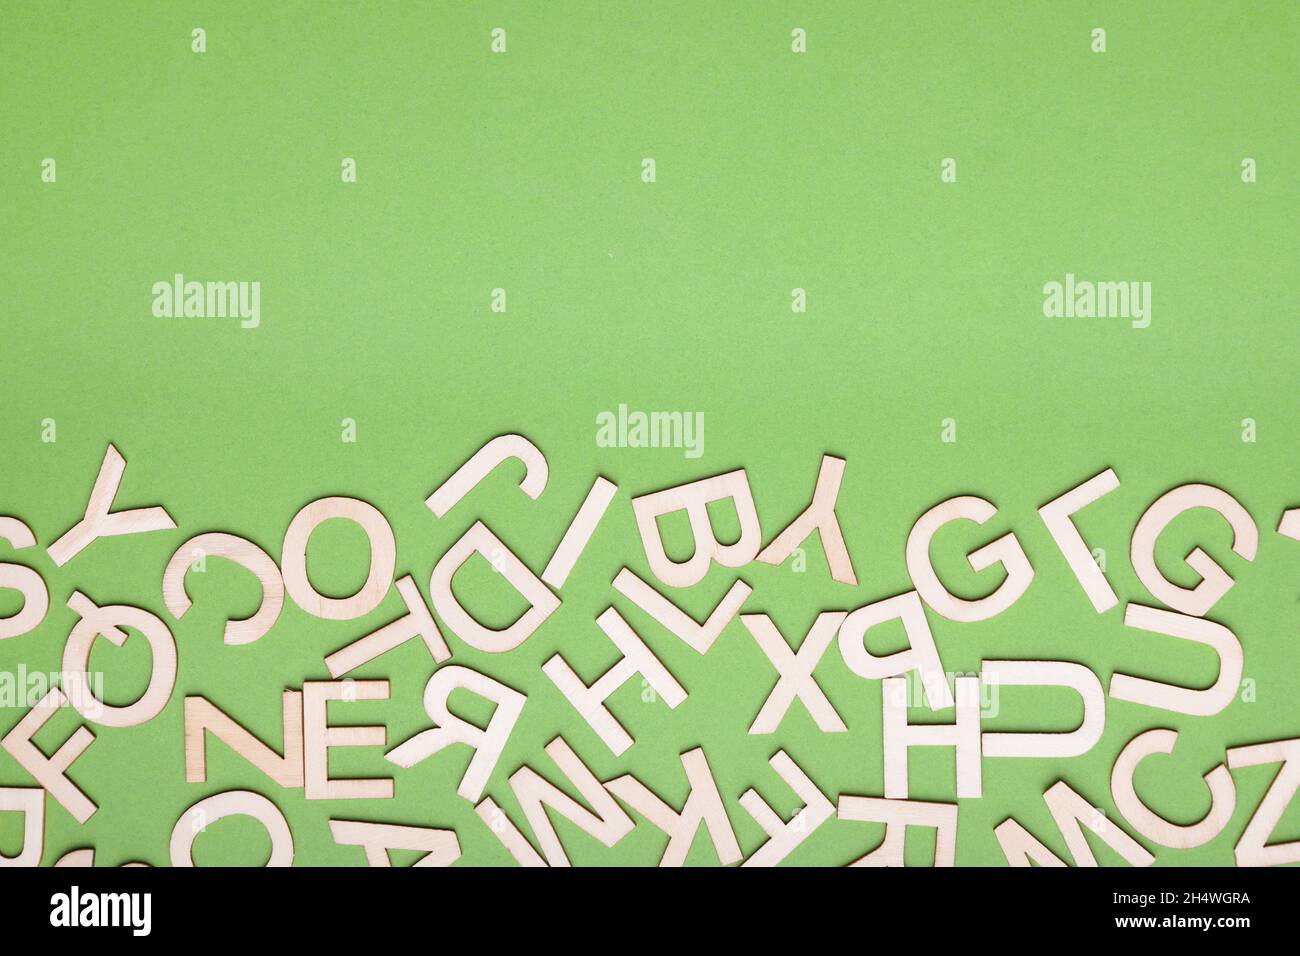 hodgepodge of wooden letters on green paper background Stock Photo